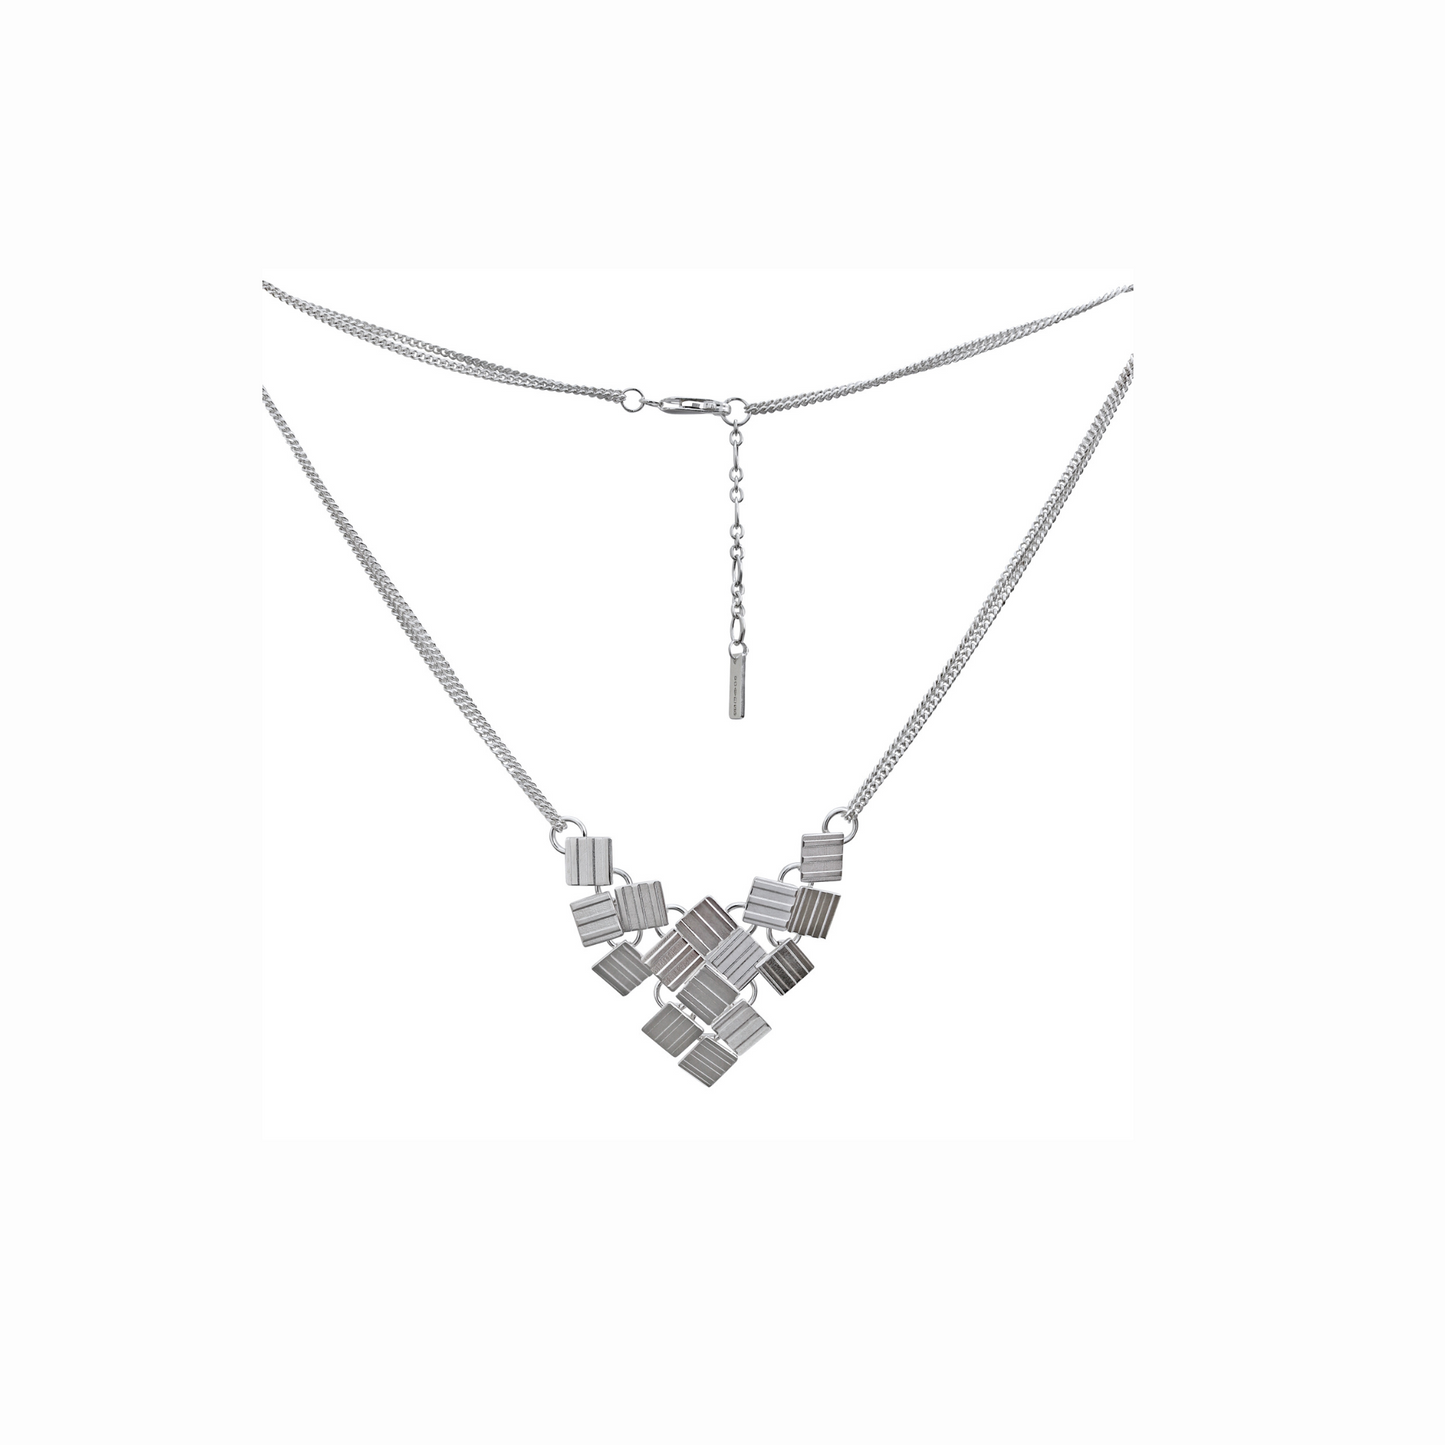 CARA TONKIN - Metropolis Chainmaille Necklace - Silver